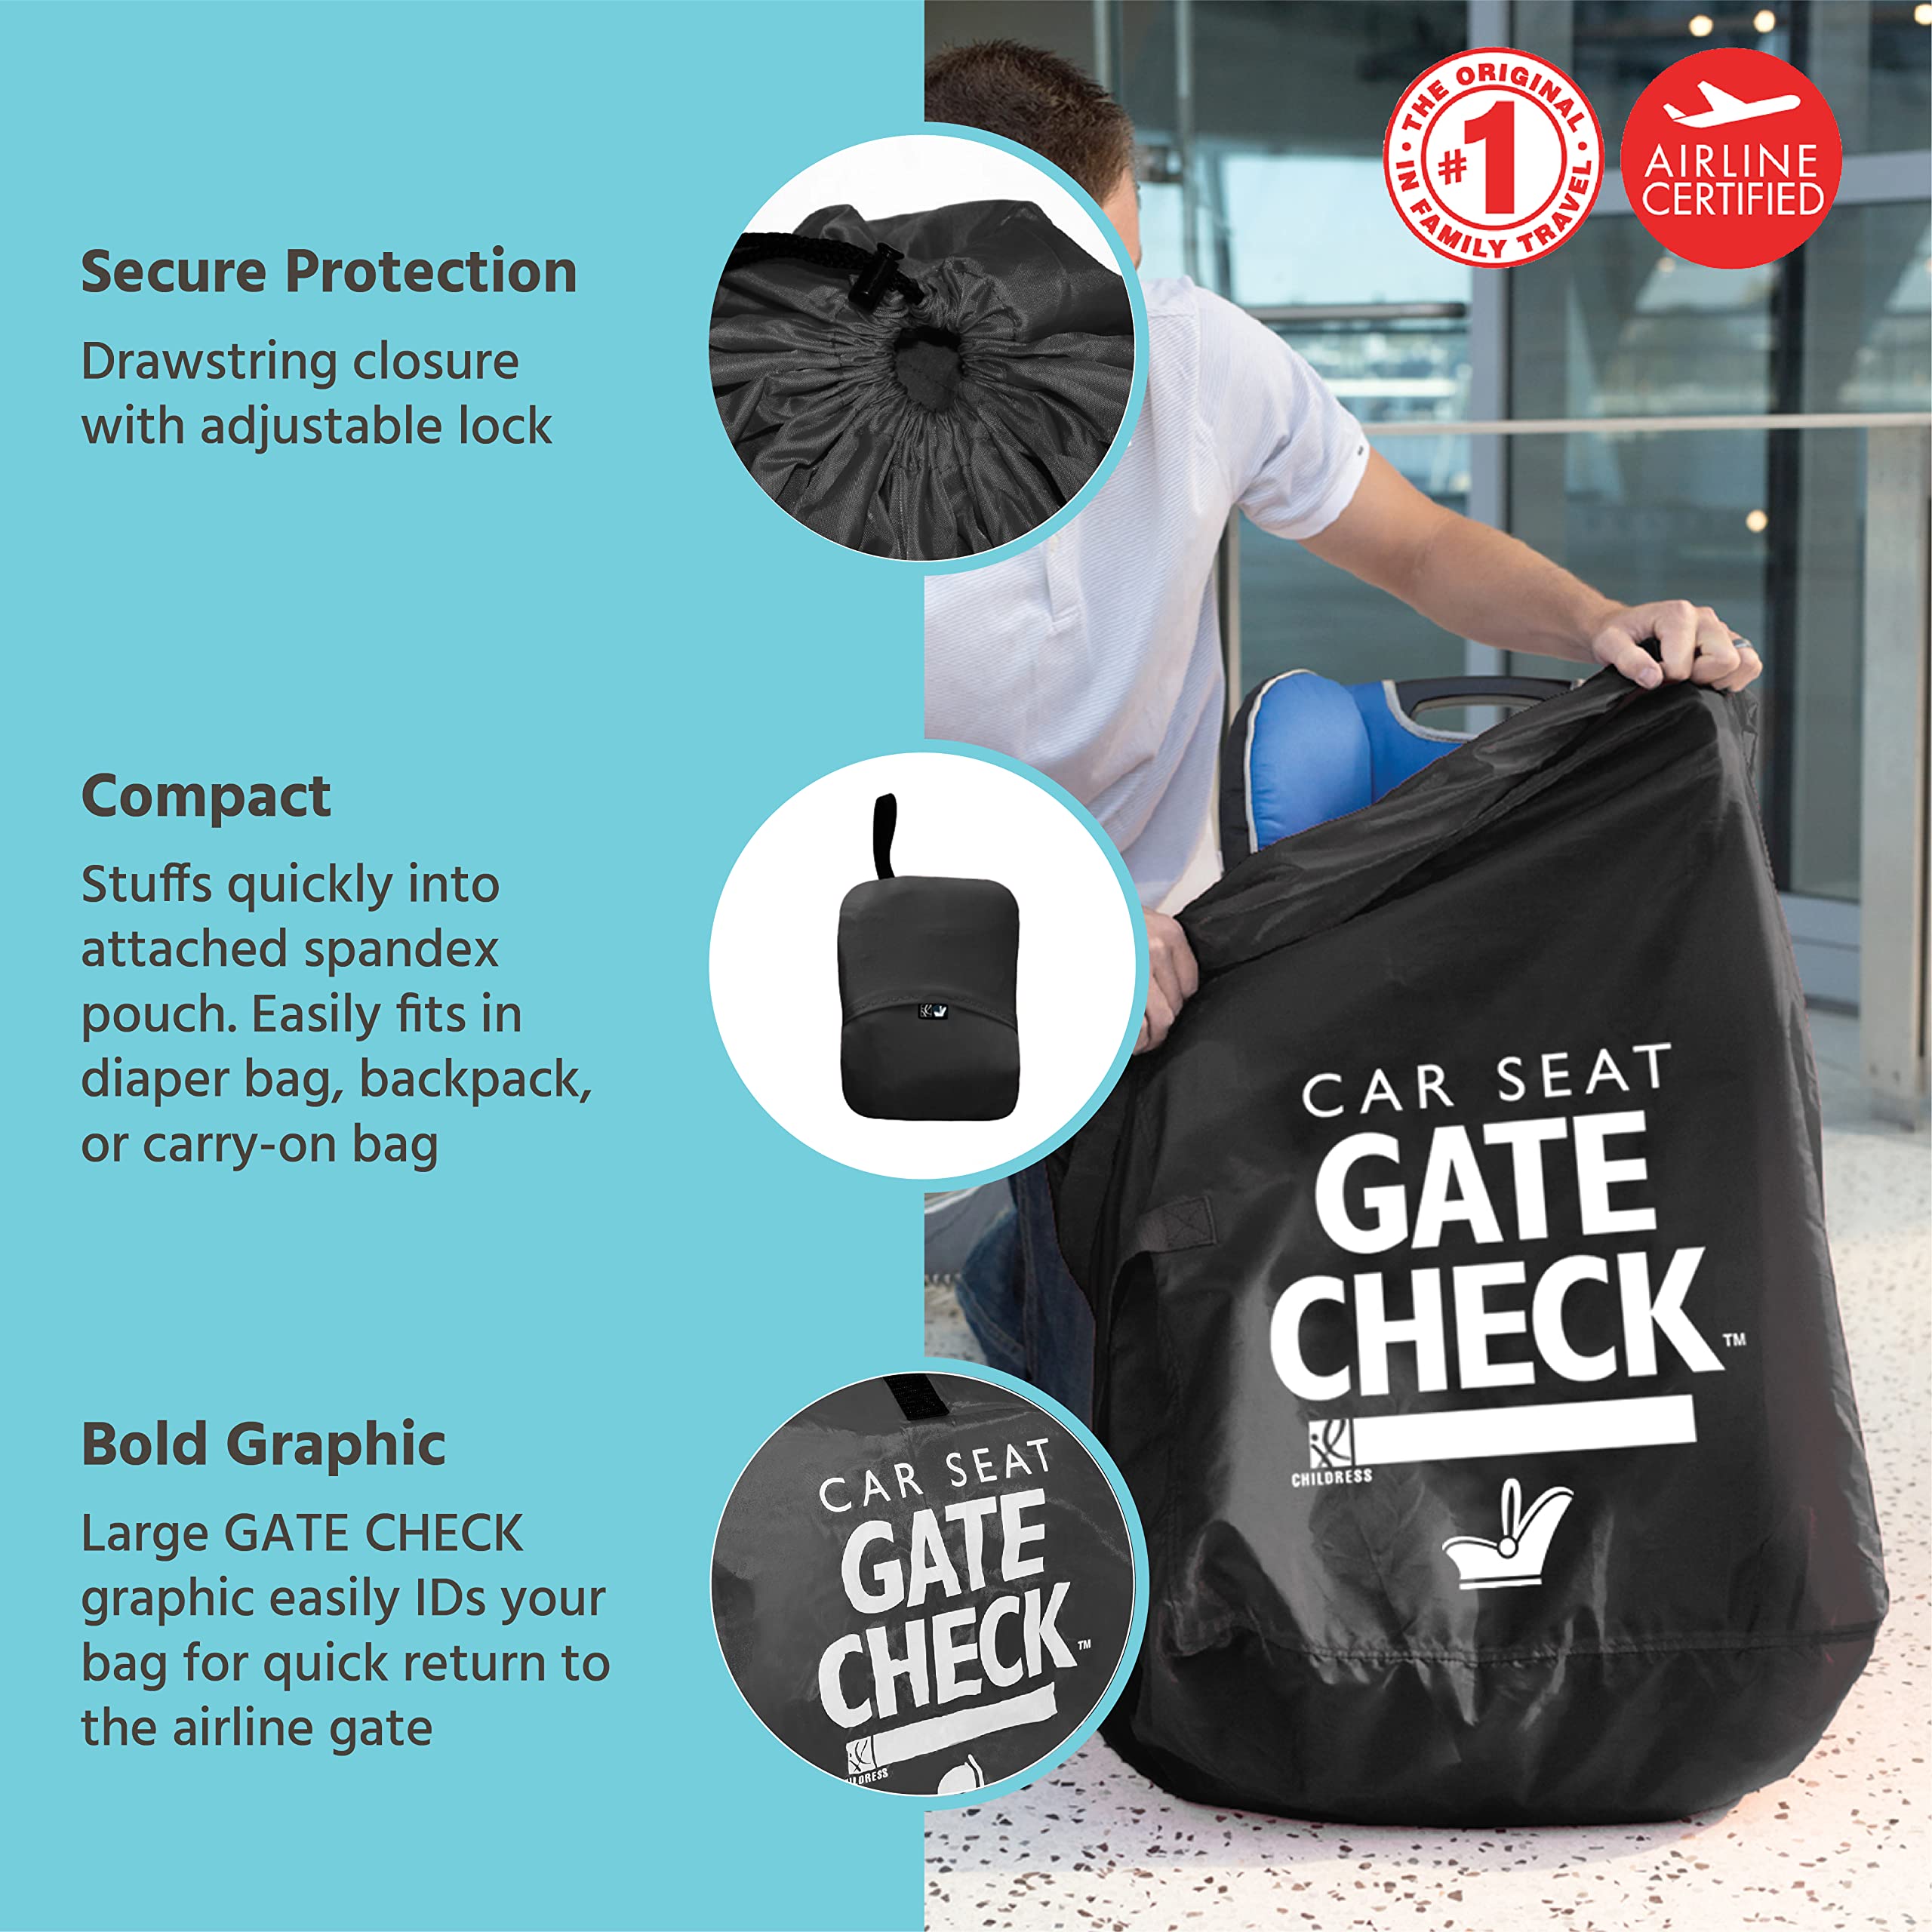 J.L. Childress Gate Check Bag for Car Seats - Air Travel Bag - Fits Convertible Car Seats, Infant carriers & Booster Seats U1